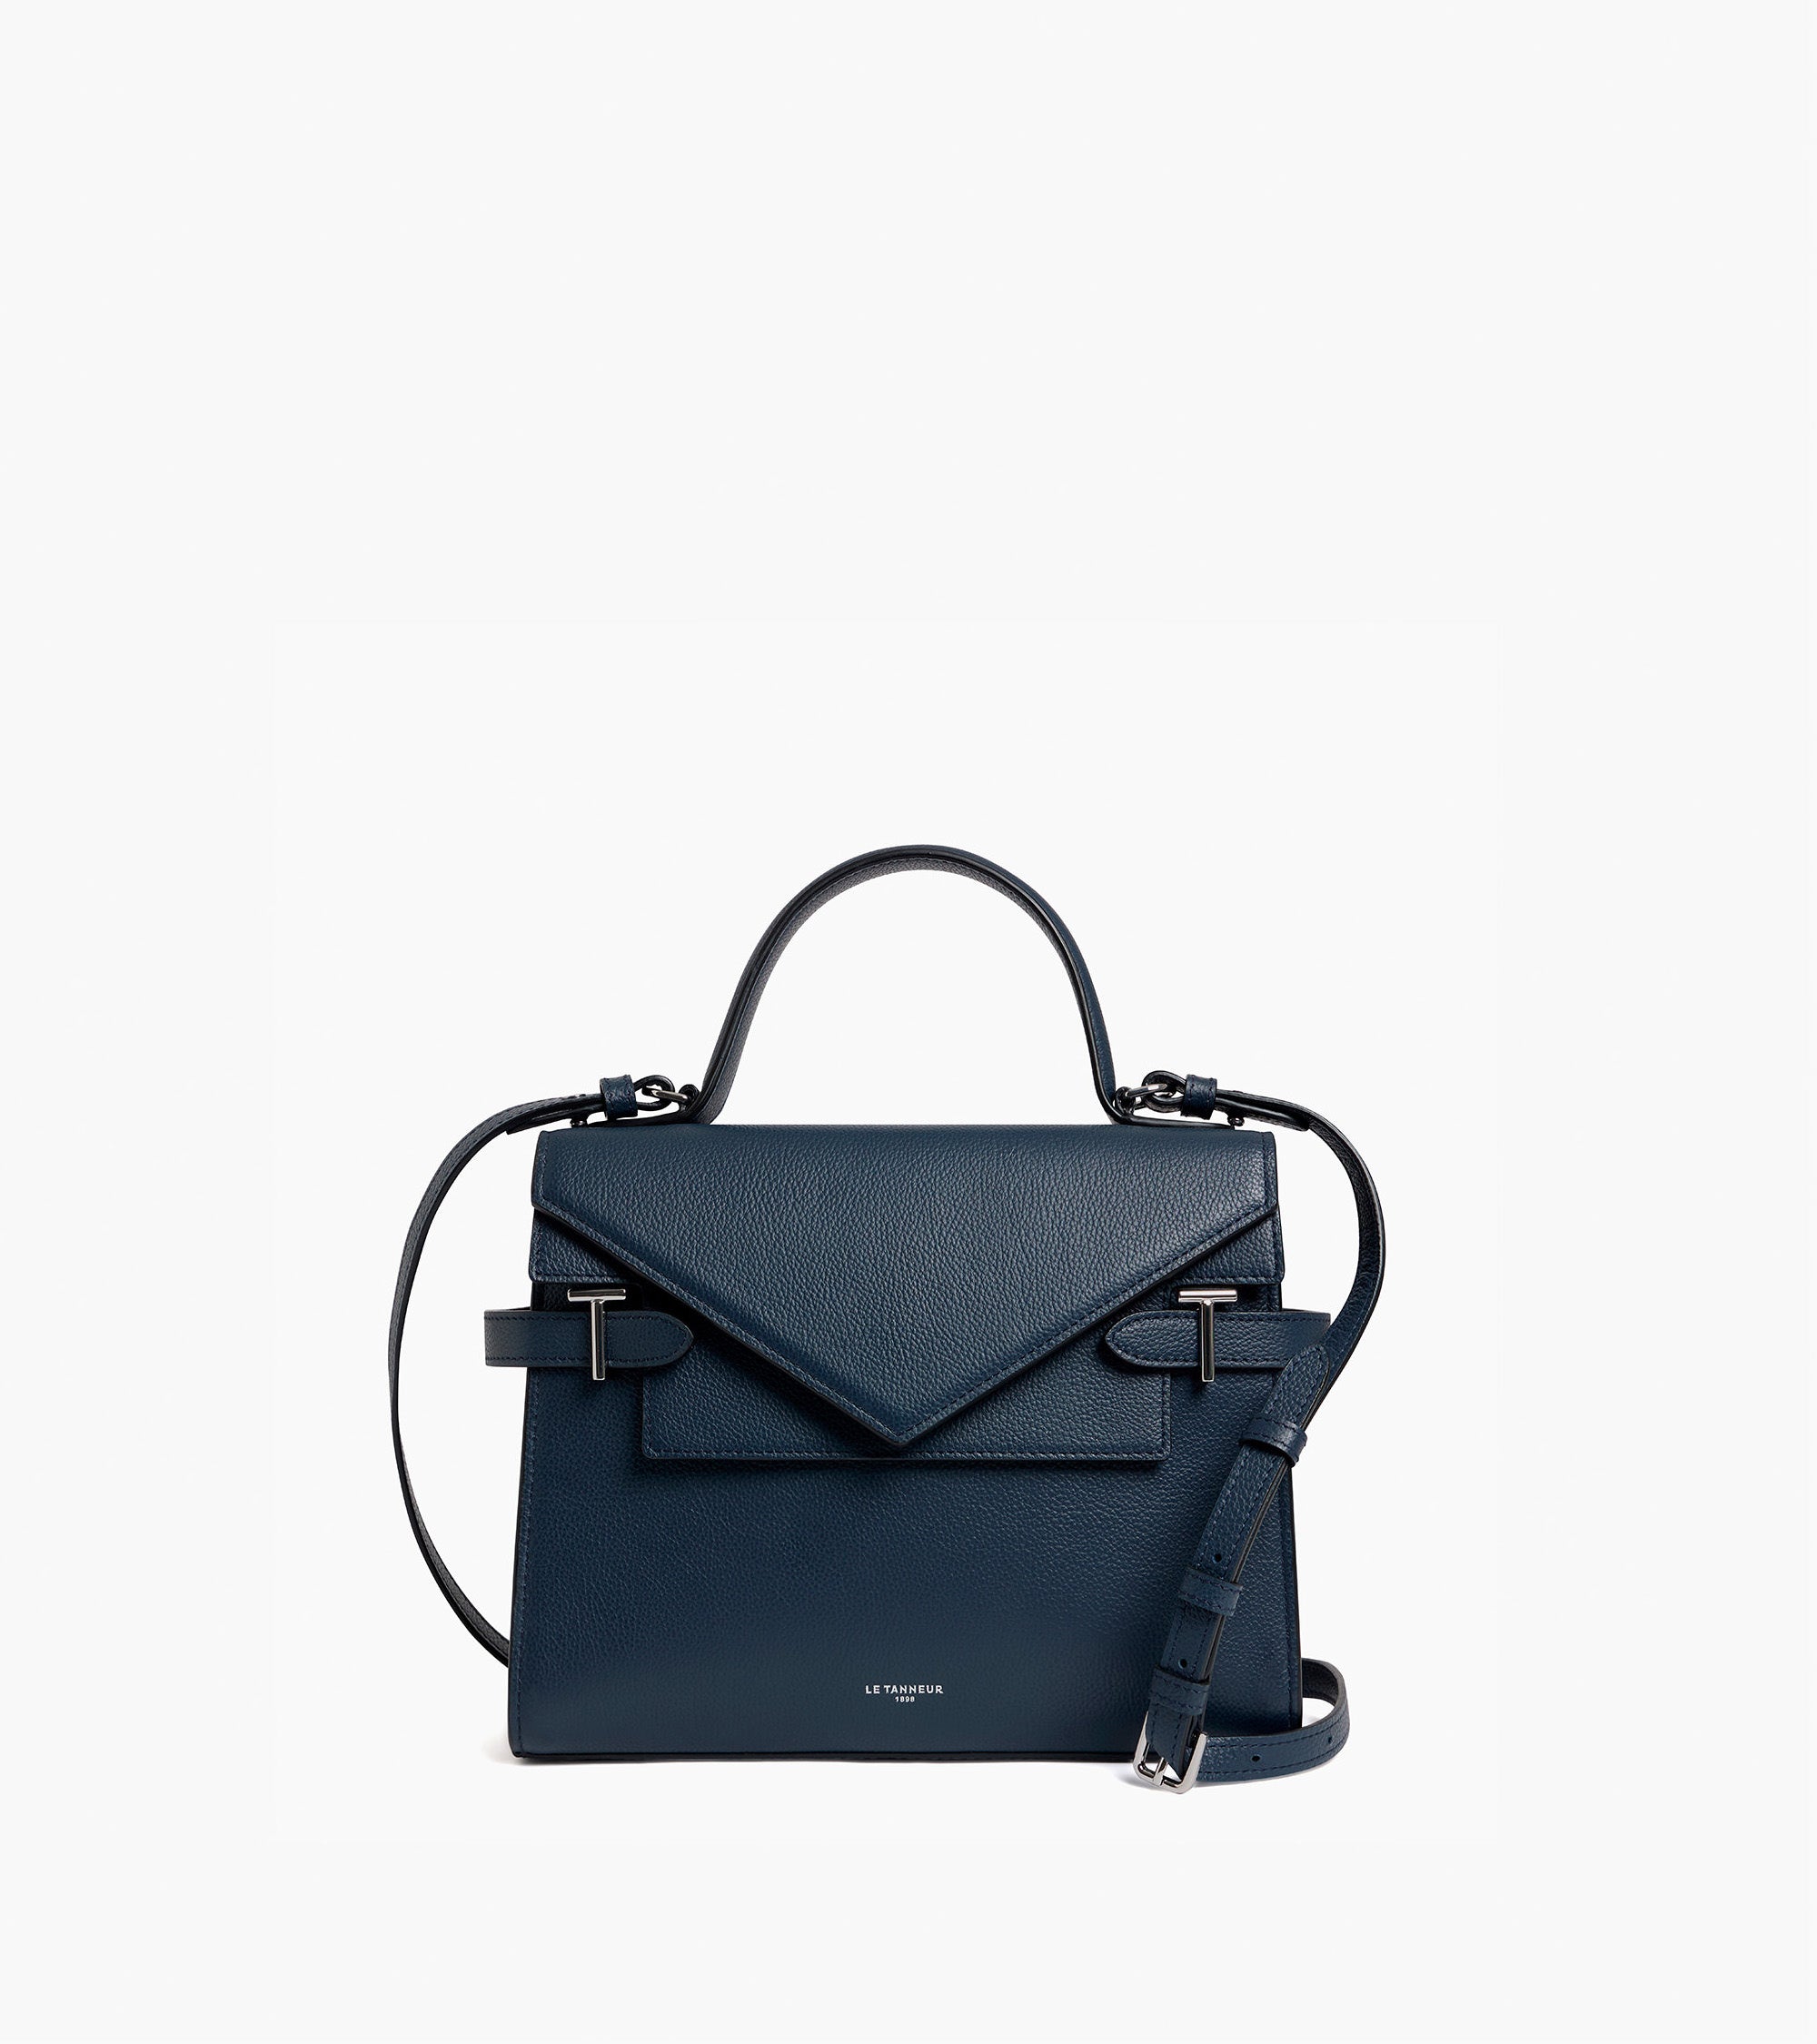 Emilie medium handbag with double flap in grained leather